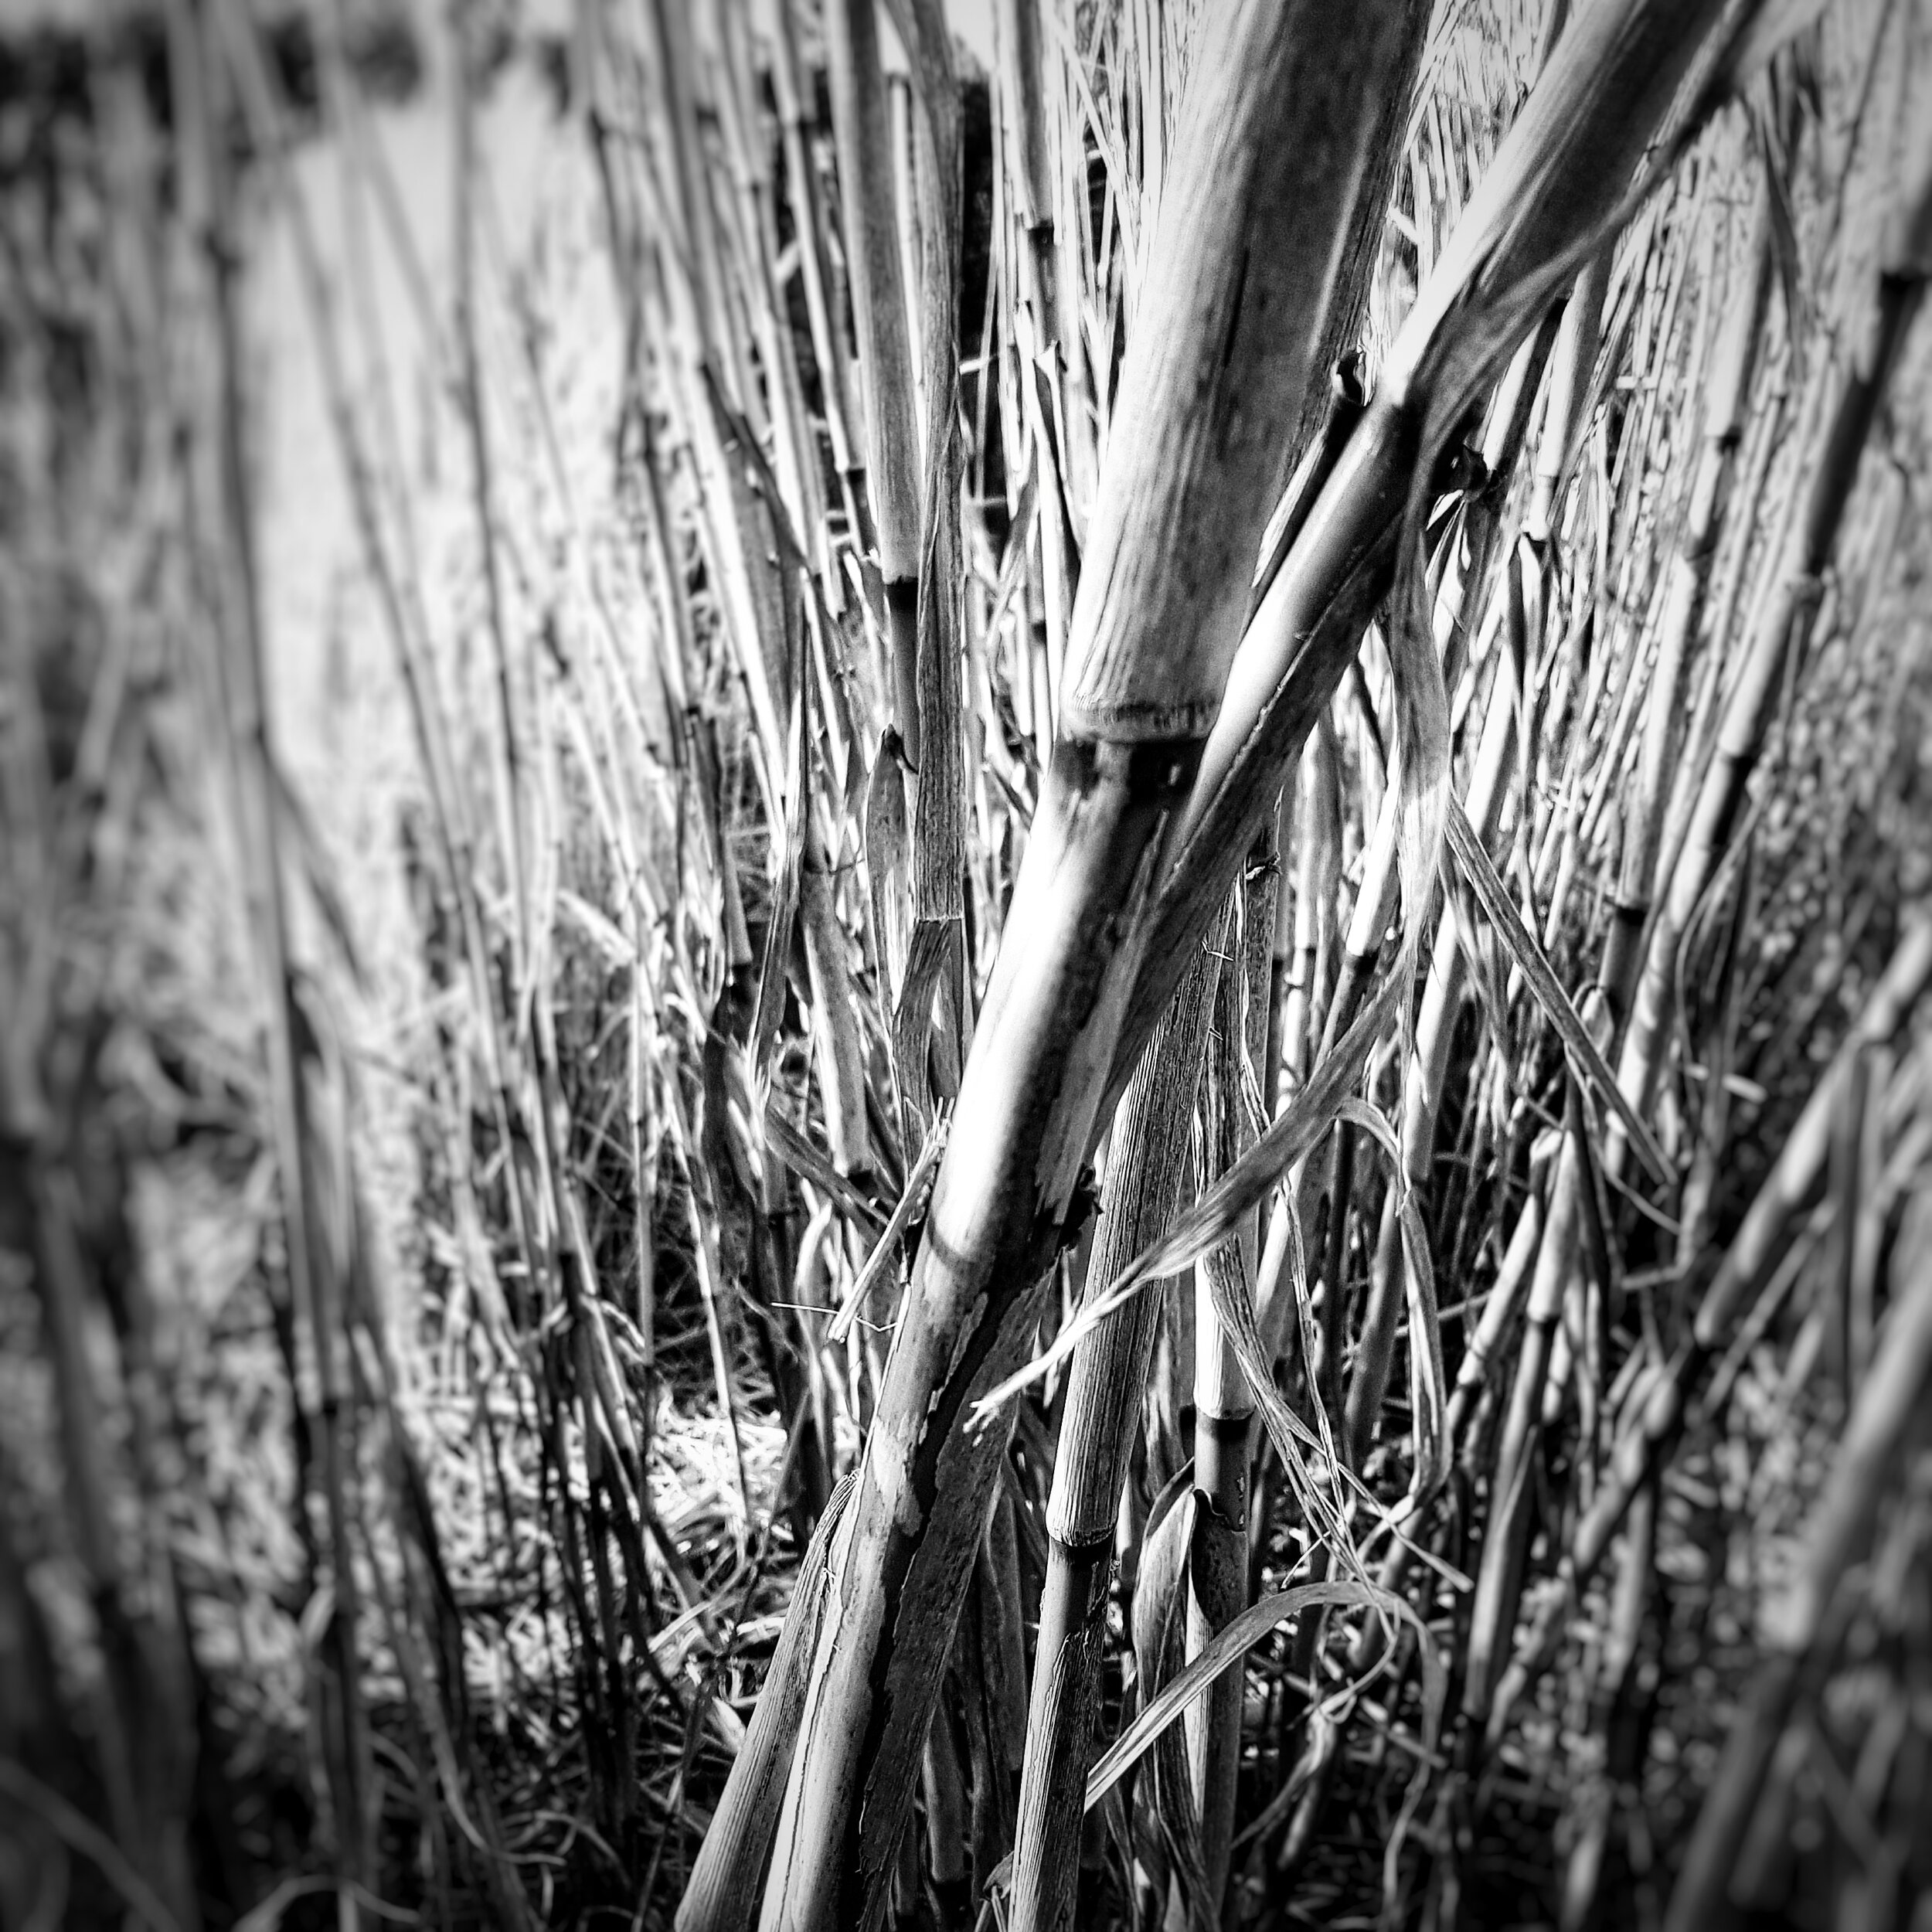 Day 61 - March 1: Bamboo